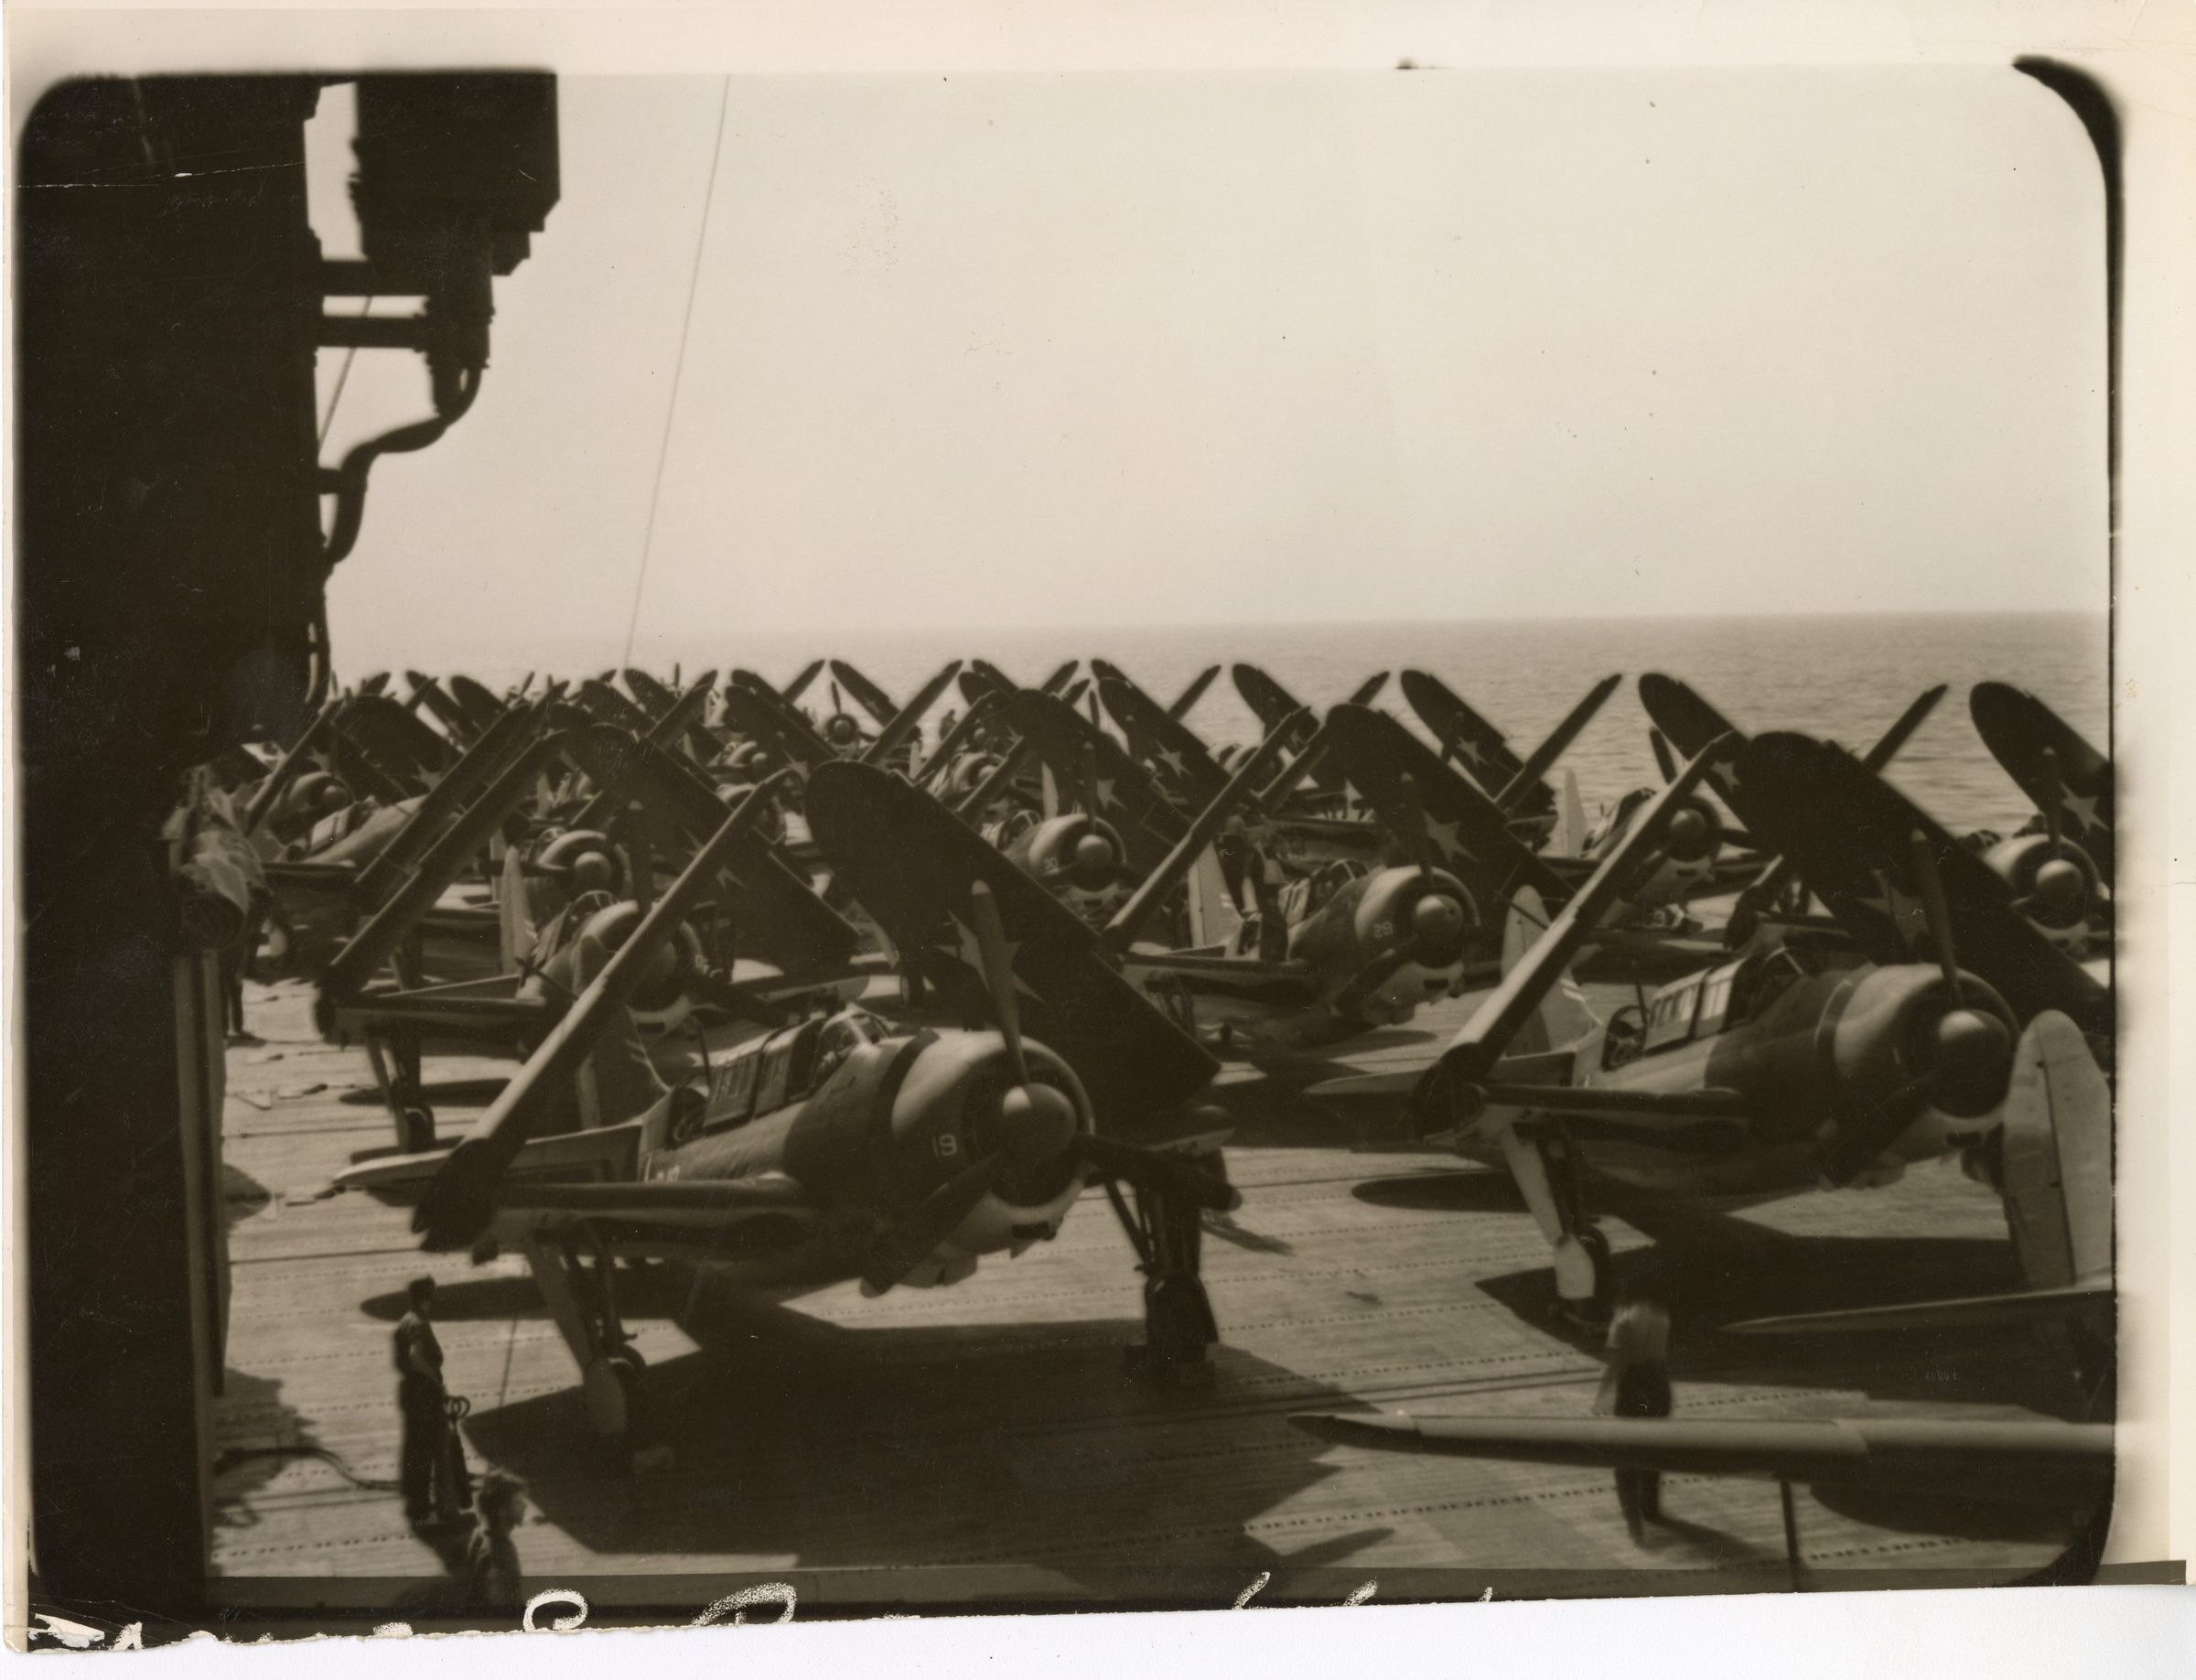 Primary Image of SB2C Helldivers on the Flightdeck